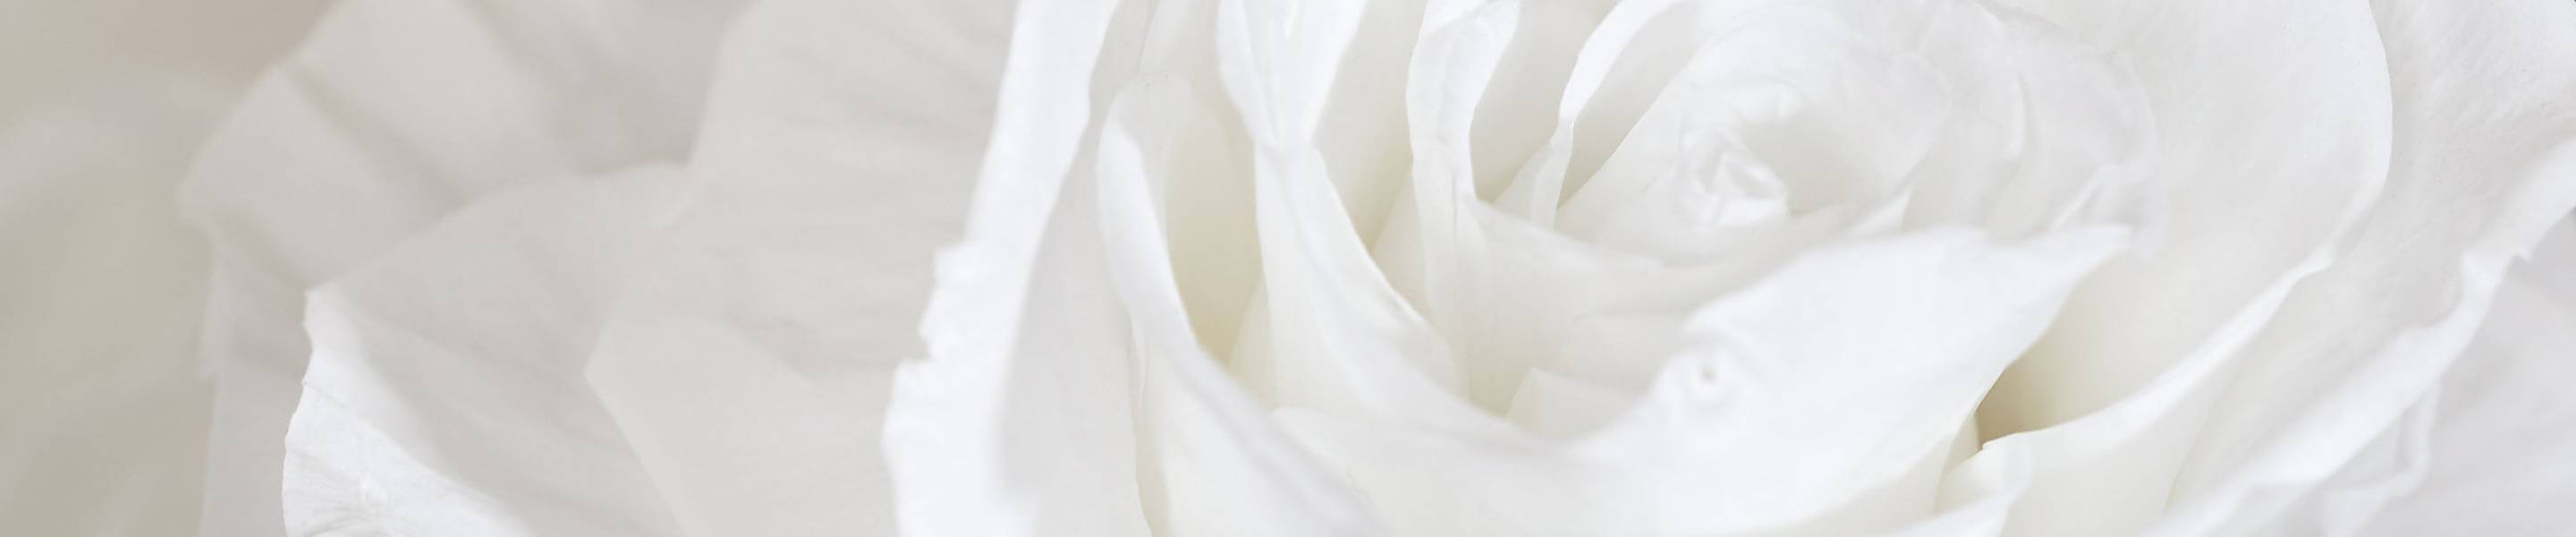 up close visual of white roses